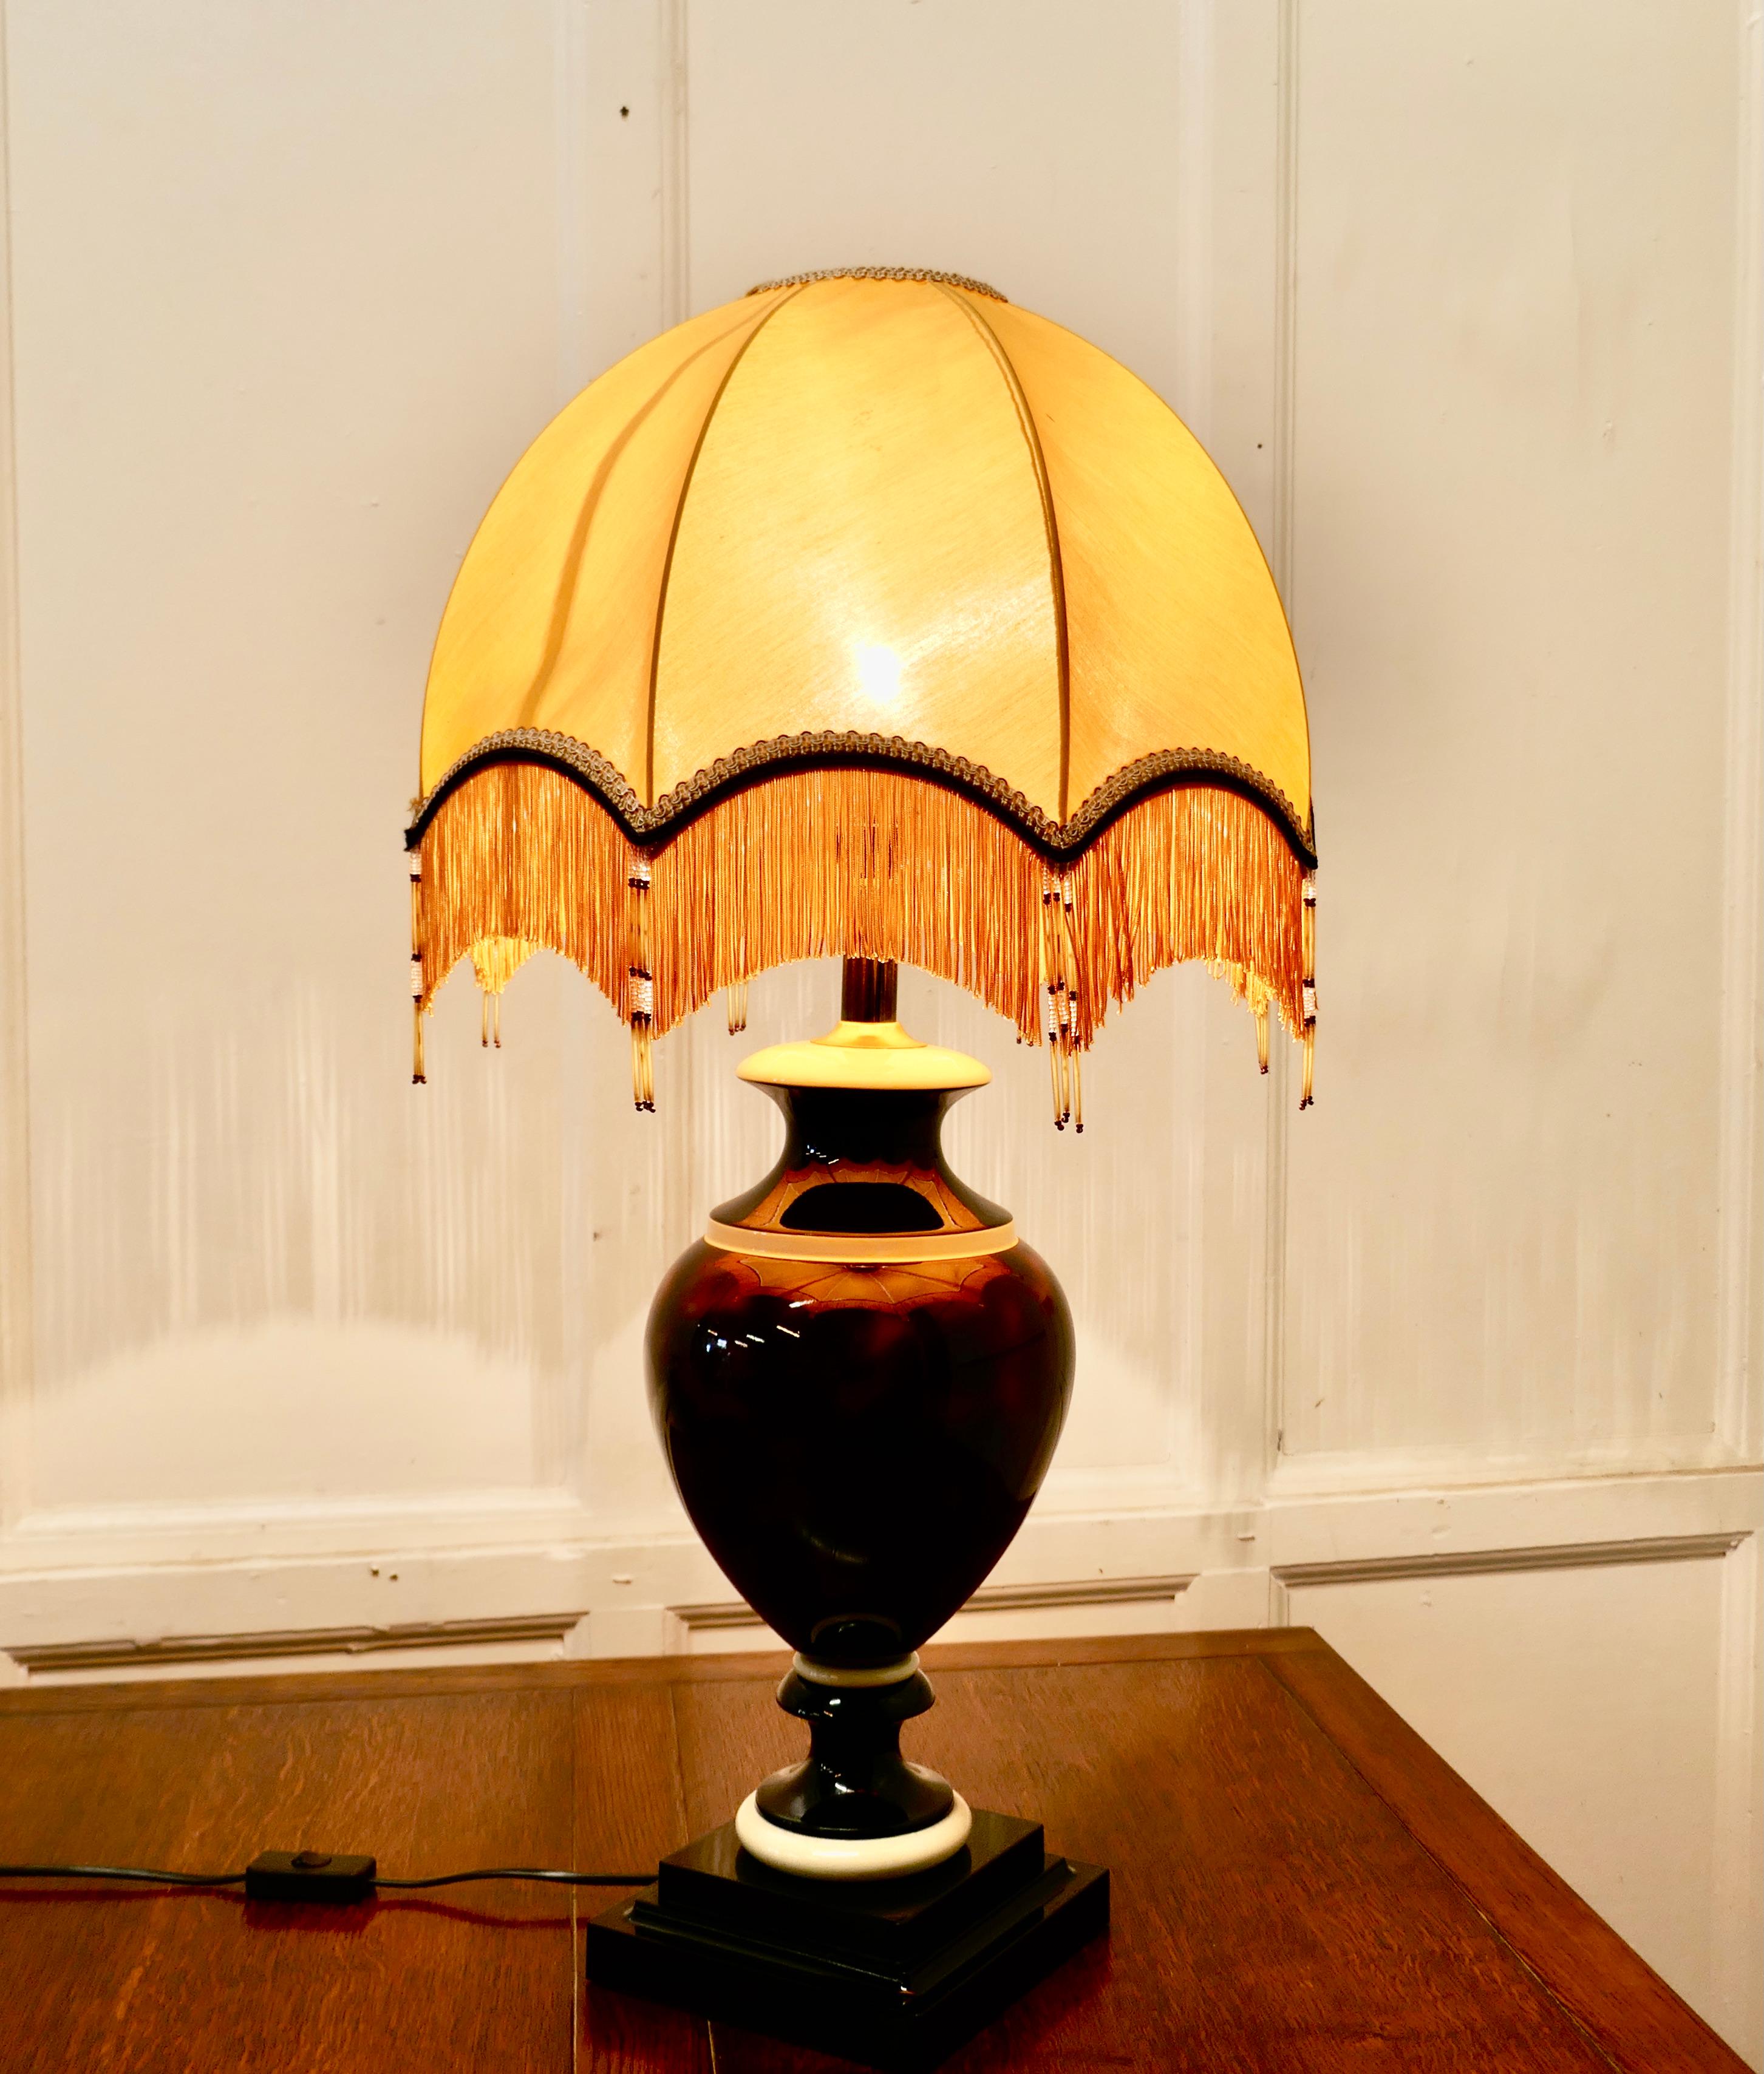 Bulbous ceramic French table lamp with dome lampshade

The lamp has a large ceramic urn which is decorated as simulated tortoiseshell, it is topped of with a superb large dome lampshade 
The lamp and shade are in good used condition, the wiring